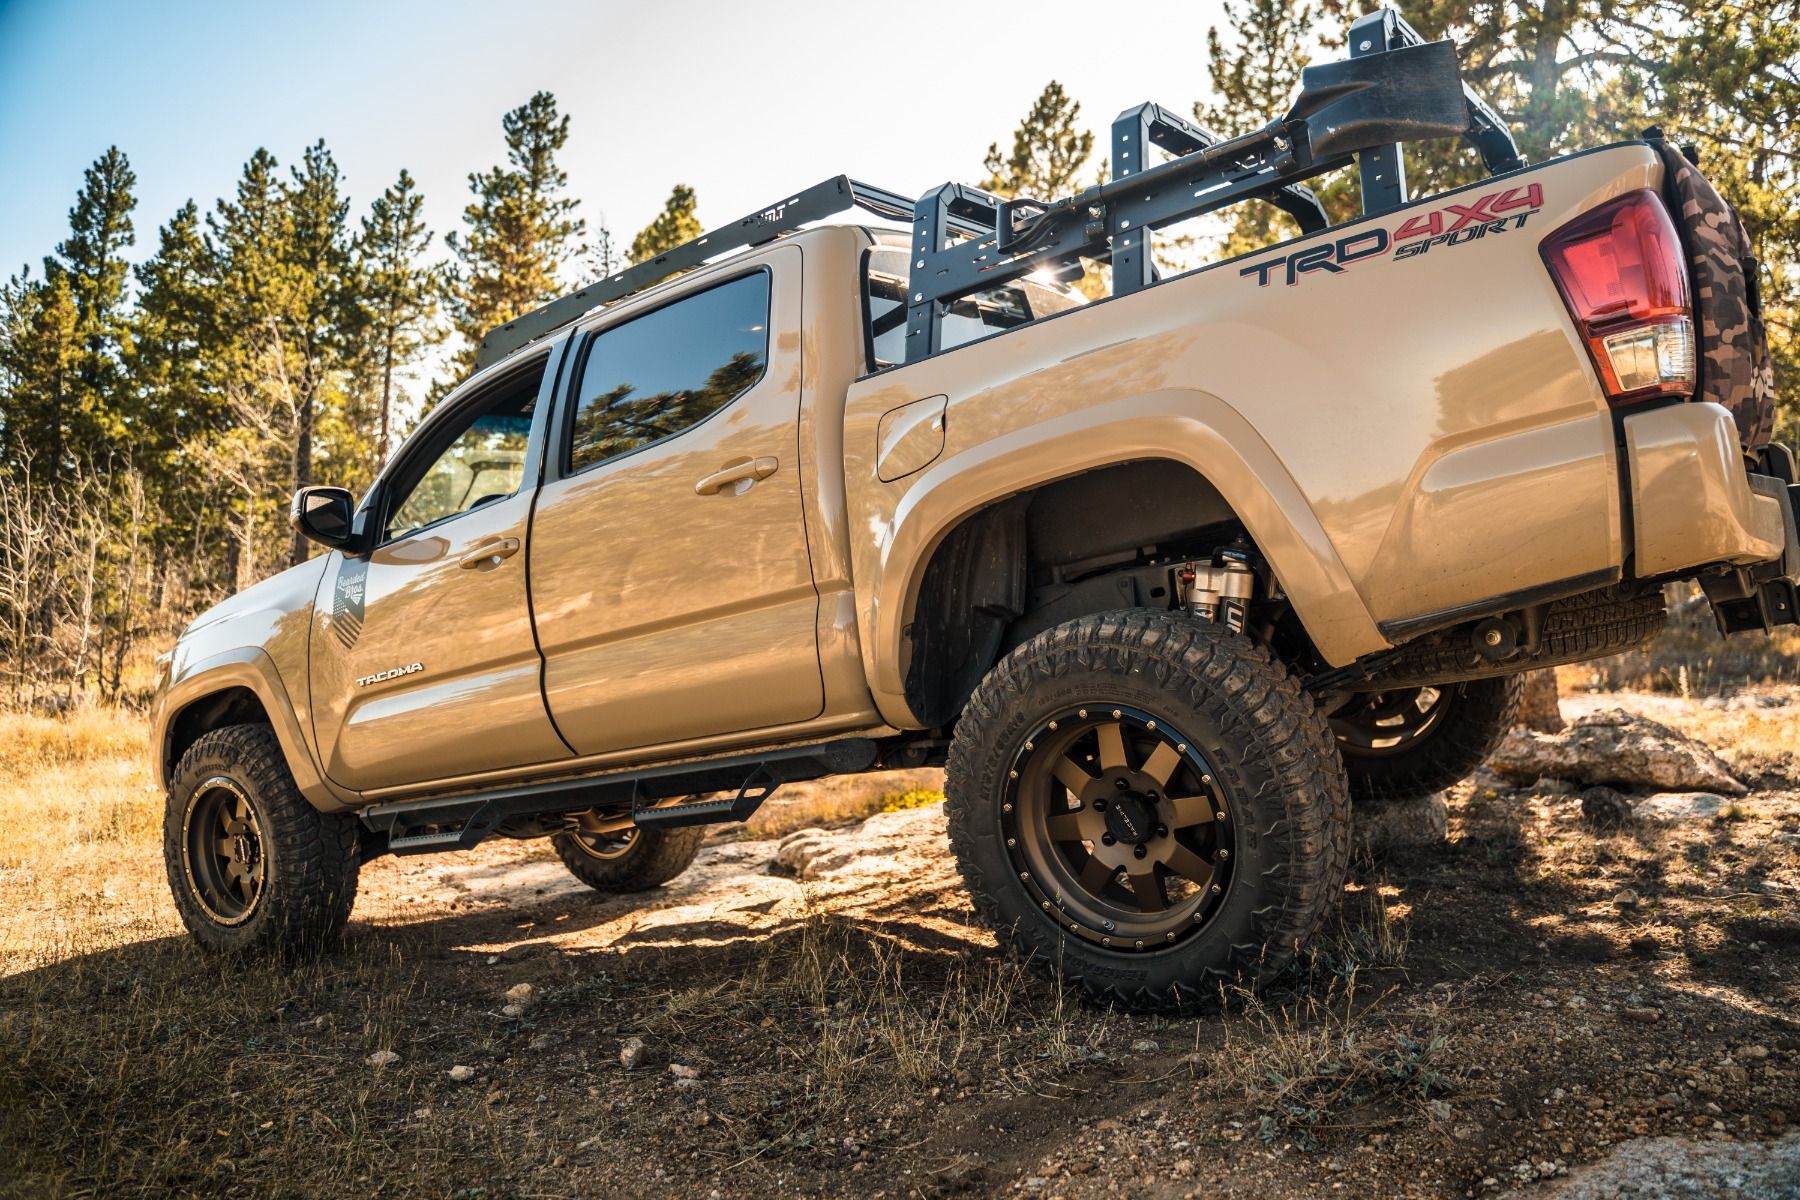 Toyota Tacoma Falcon Shocks, Kit Available at Mike's Custom Toys. Built For Adventure